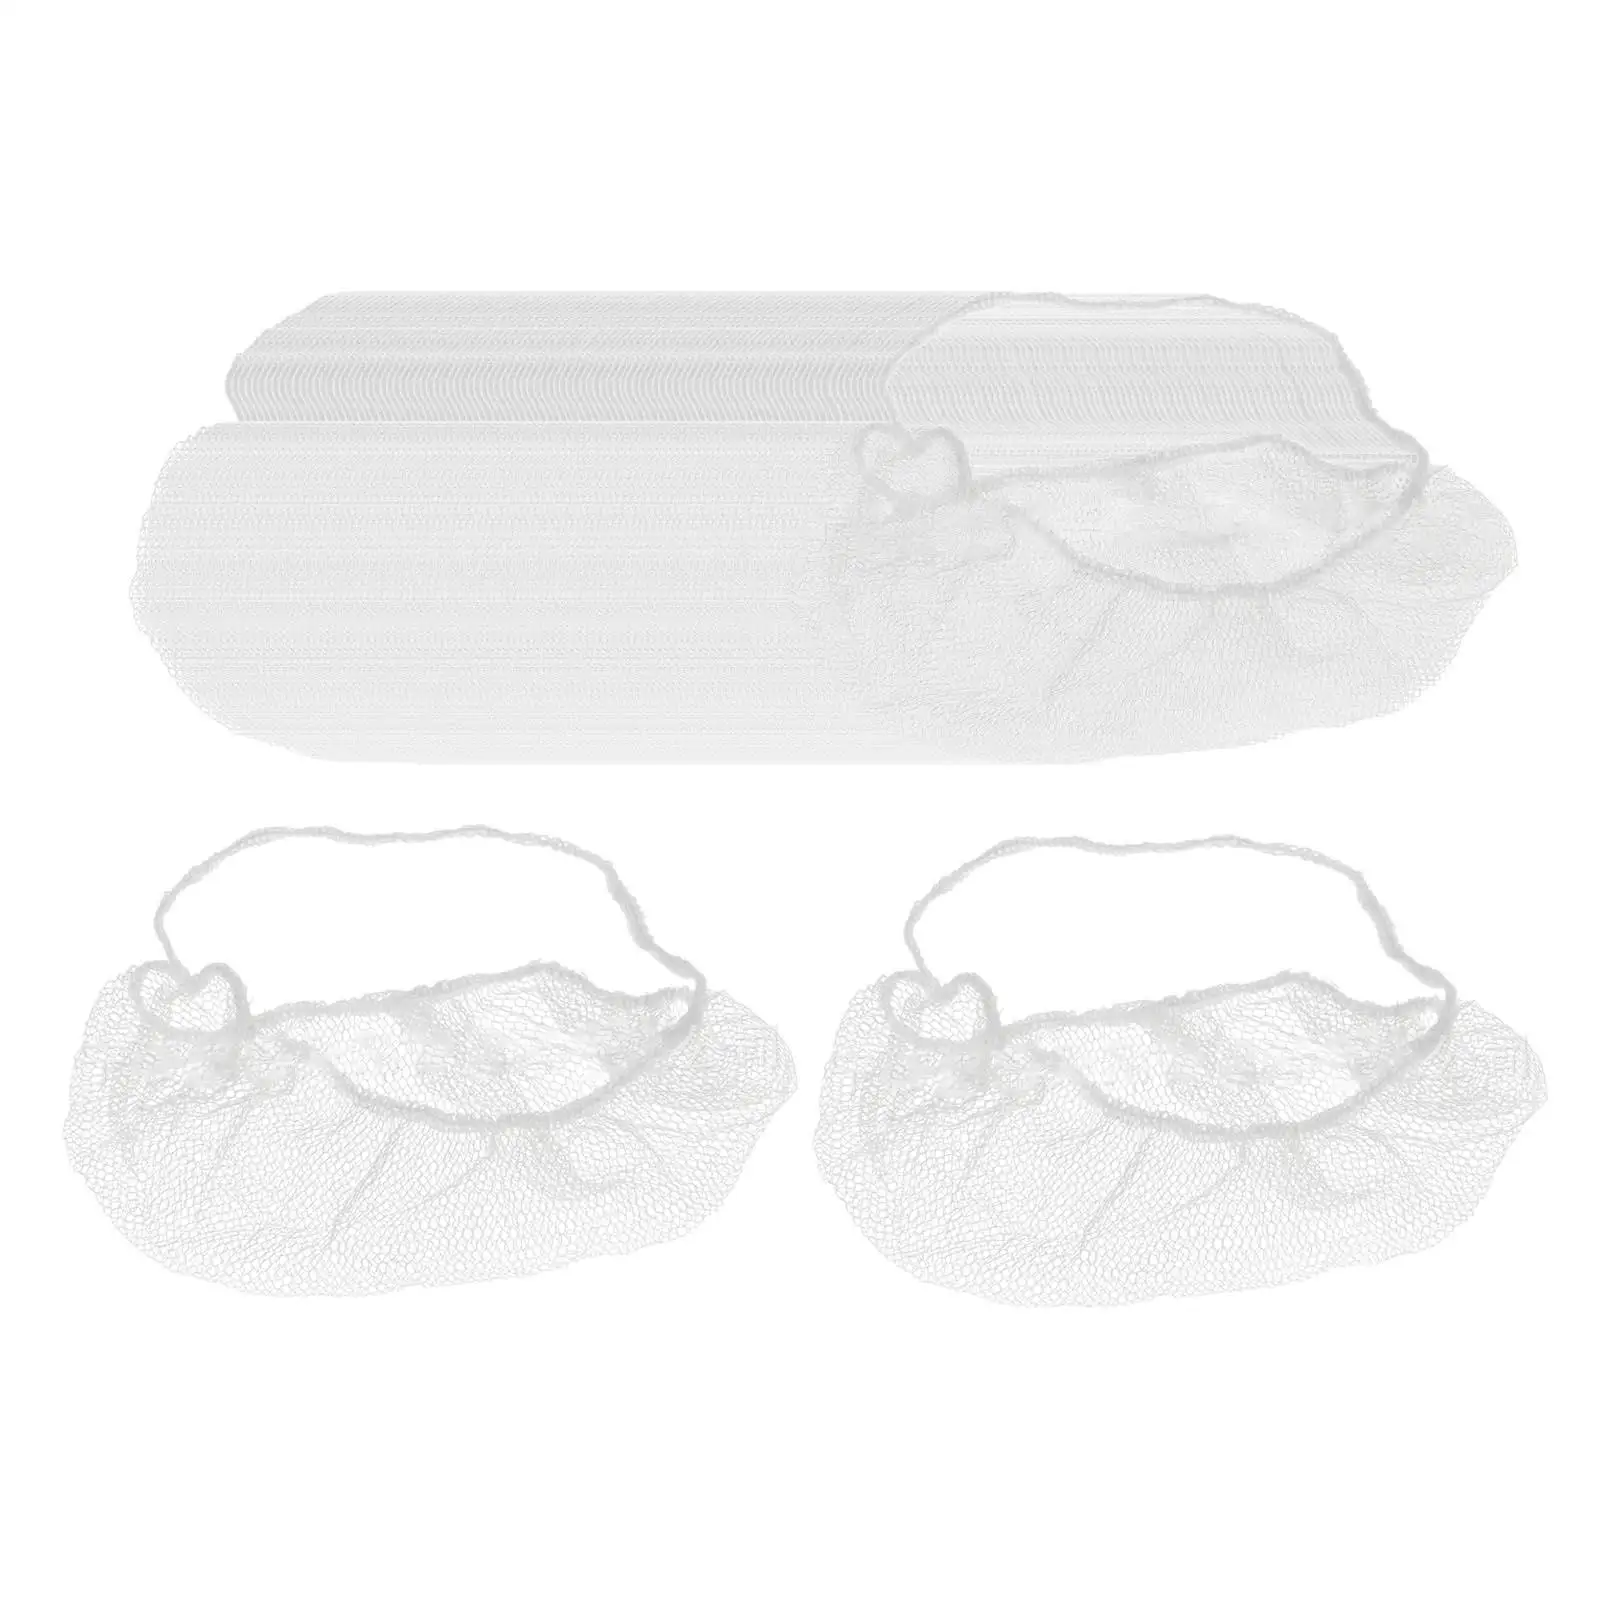 100 Pieces Disposable Nylon Beard Covers Beard Protectors Breathable for Food Production and Processing Facilities Professional